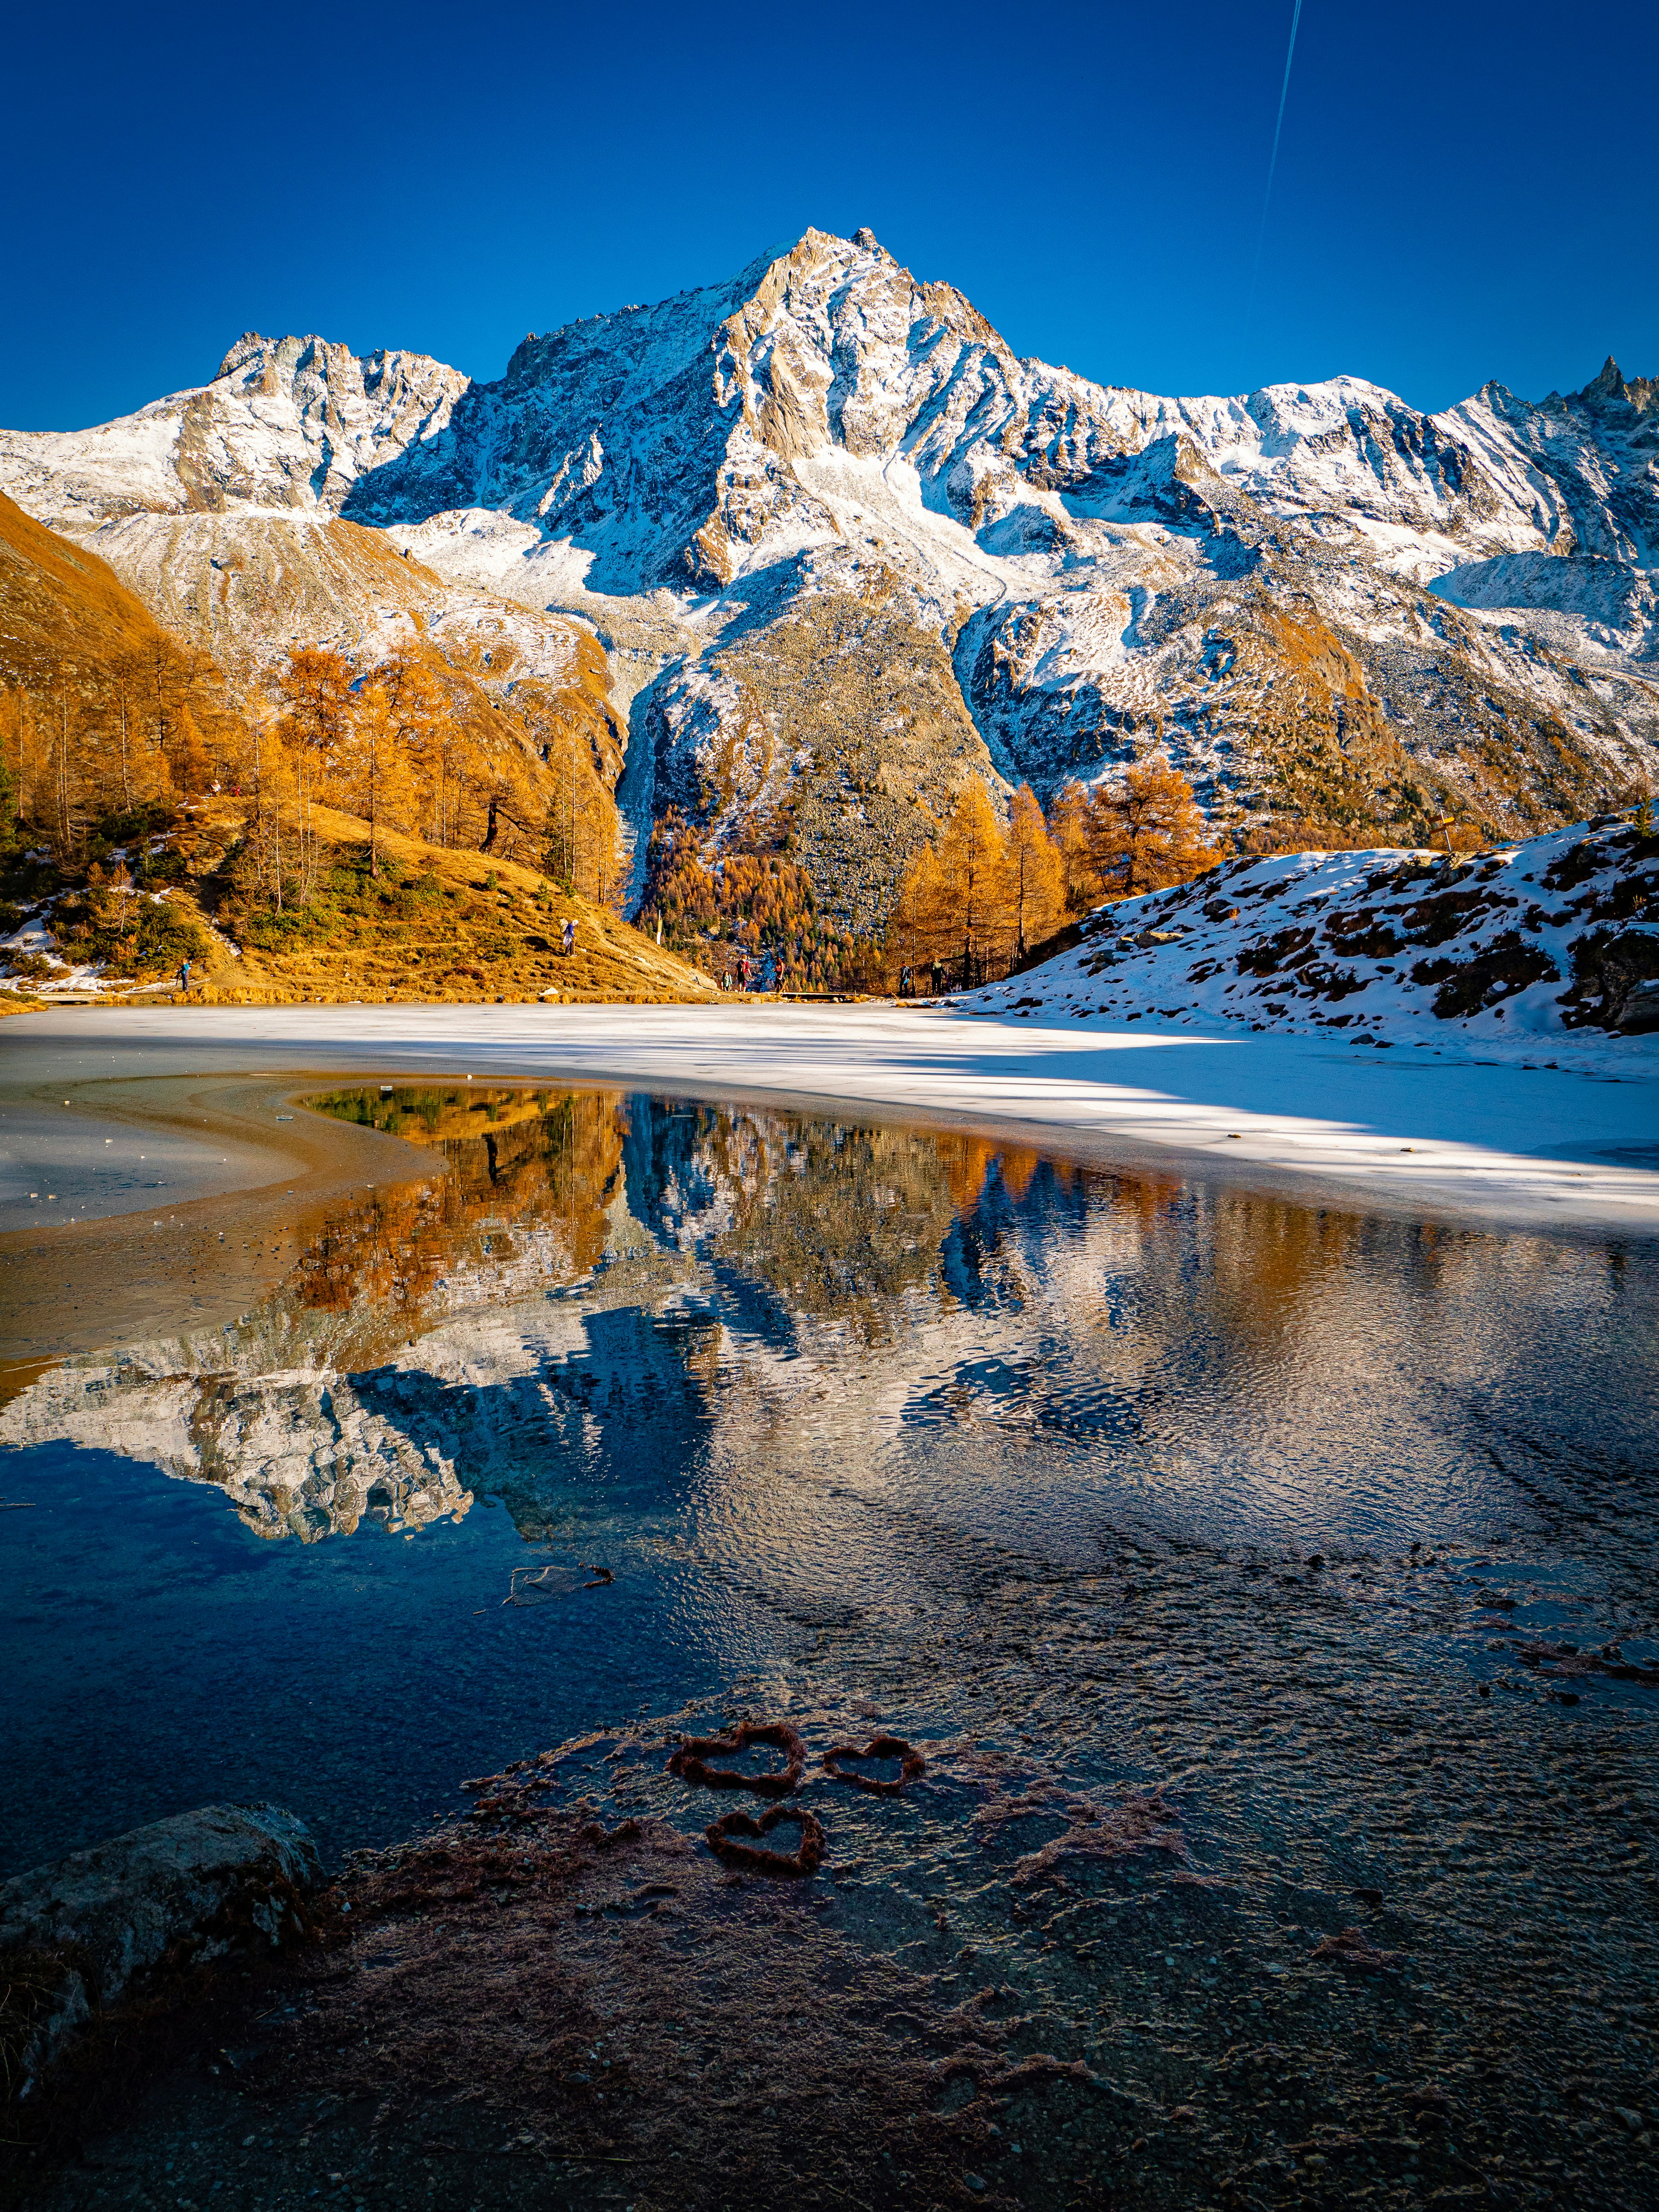 Fall in the Swiss Alps.